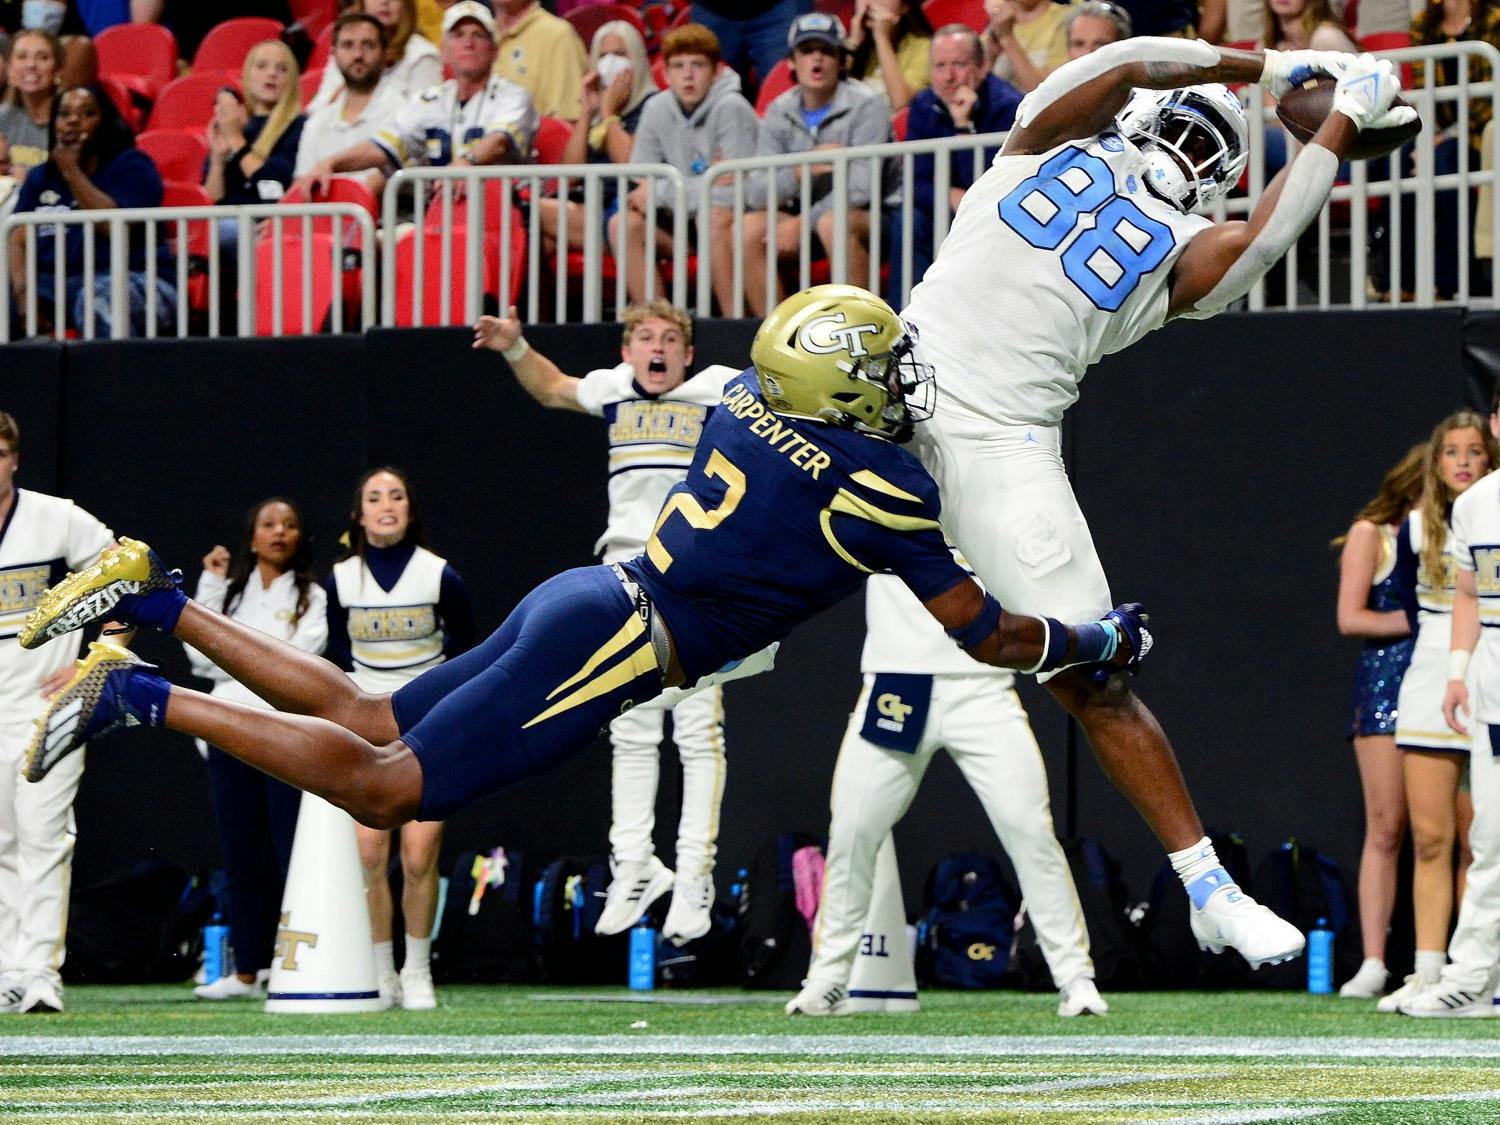 UNC sophomore tight end Kamari Morales (88) intercepts a long pass during the Tar Heels' away game against Georgia Tech in the Mercedes-Benz Stadium in Atlanta, GA, on Sept. 25, 2021. Photo Courtesy of UNC Athletic Communications. 